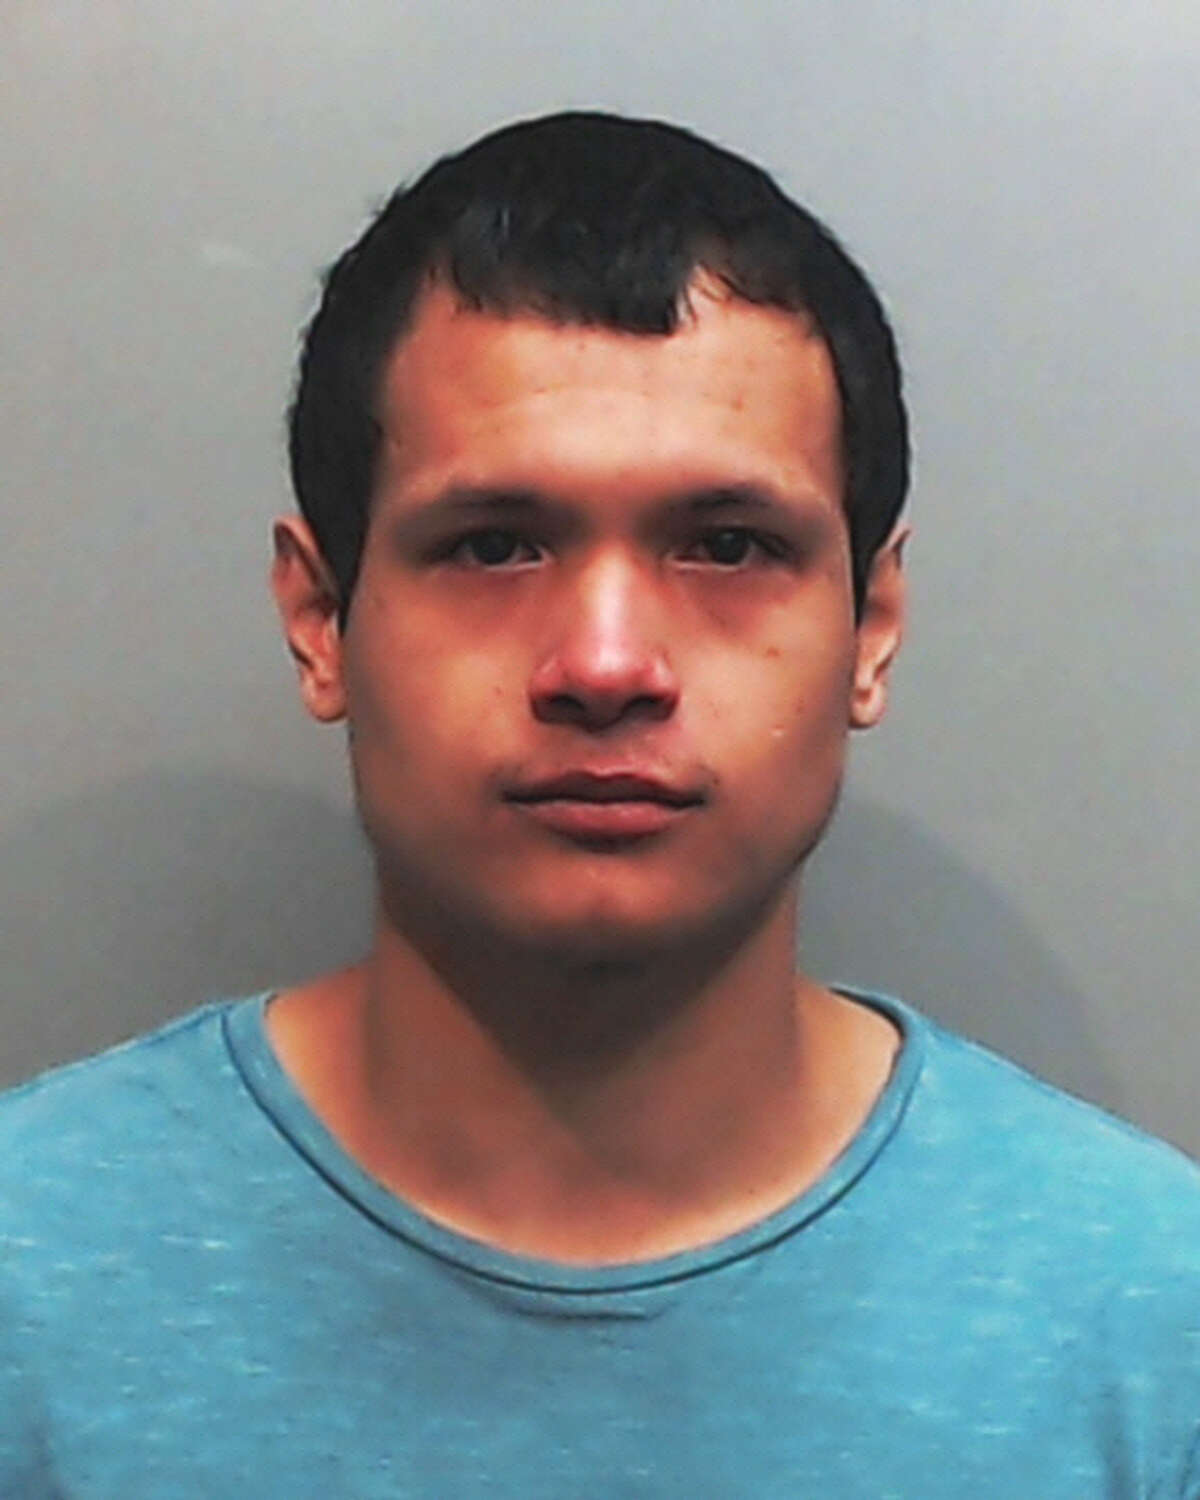 Justin Cameron Carrillo, 22, faces first-degree felony charge of aggravated robbery and aggravated kidnapping, both charges having a penalty of five to 99 years or life in prison.